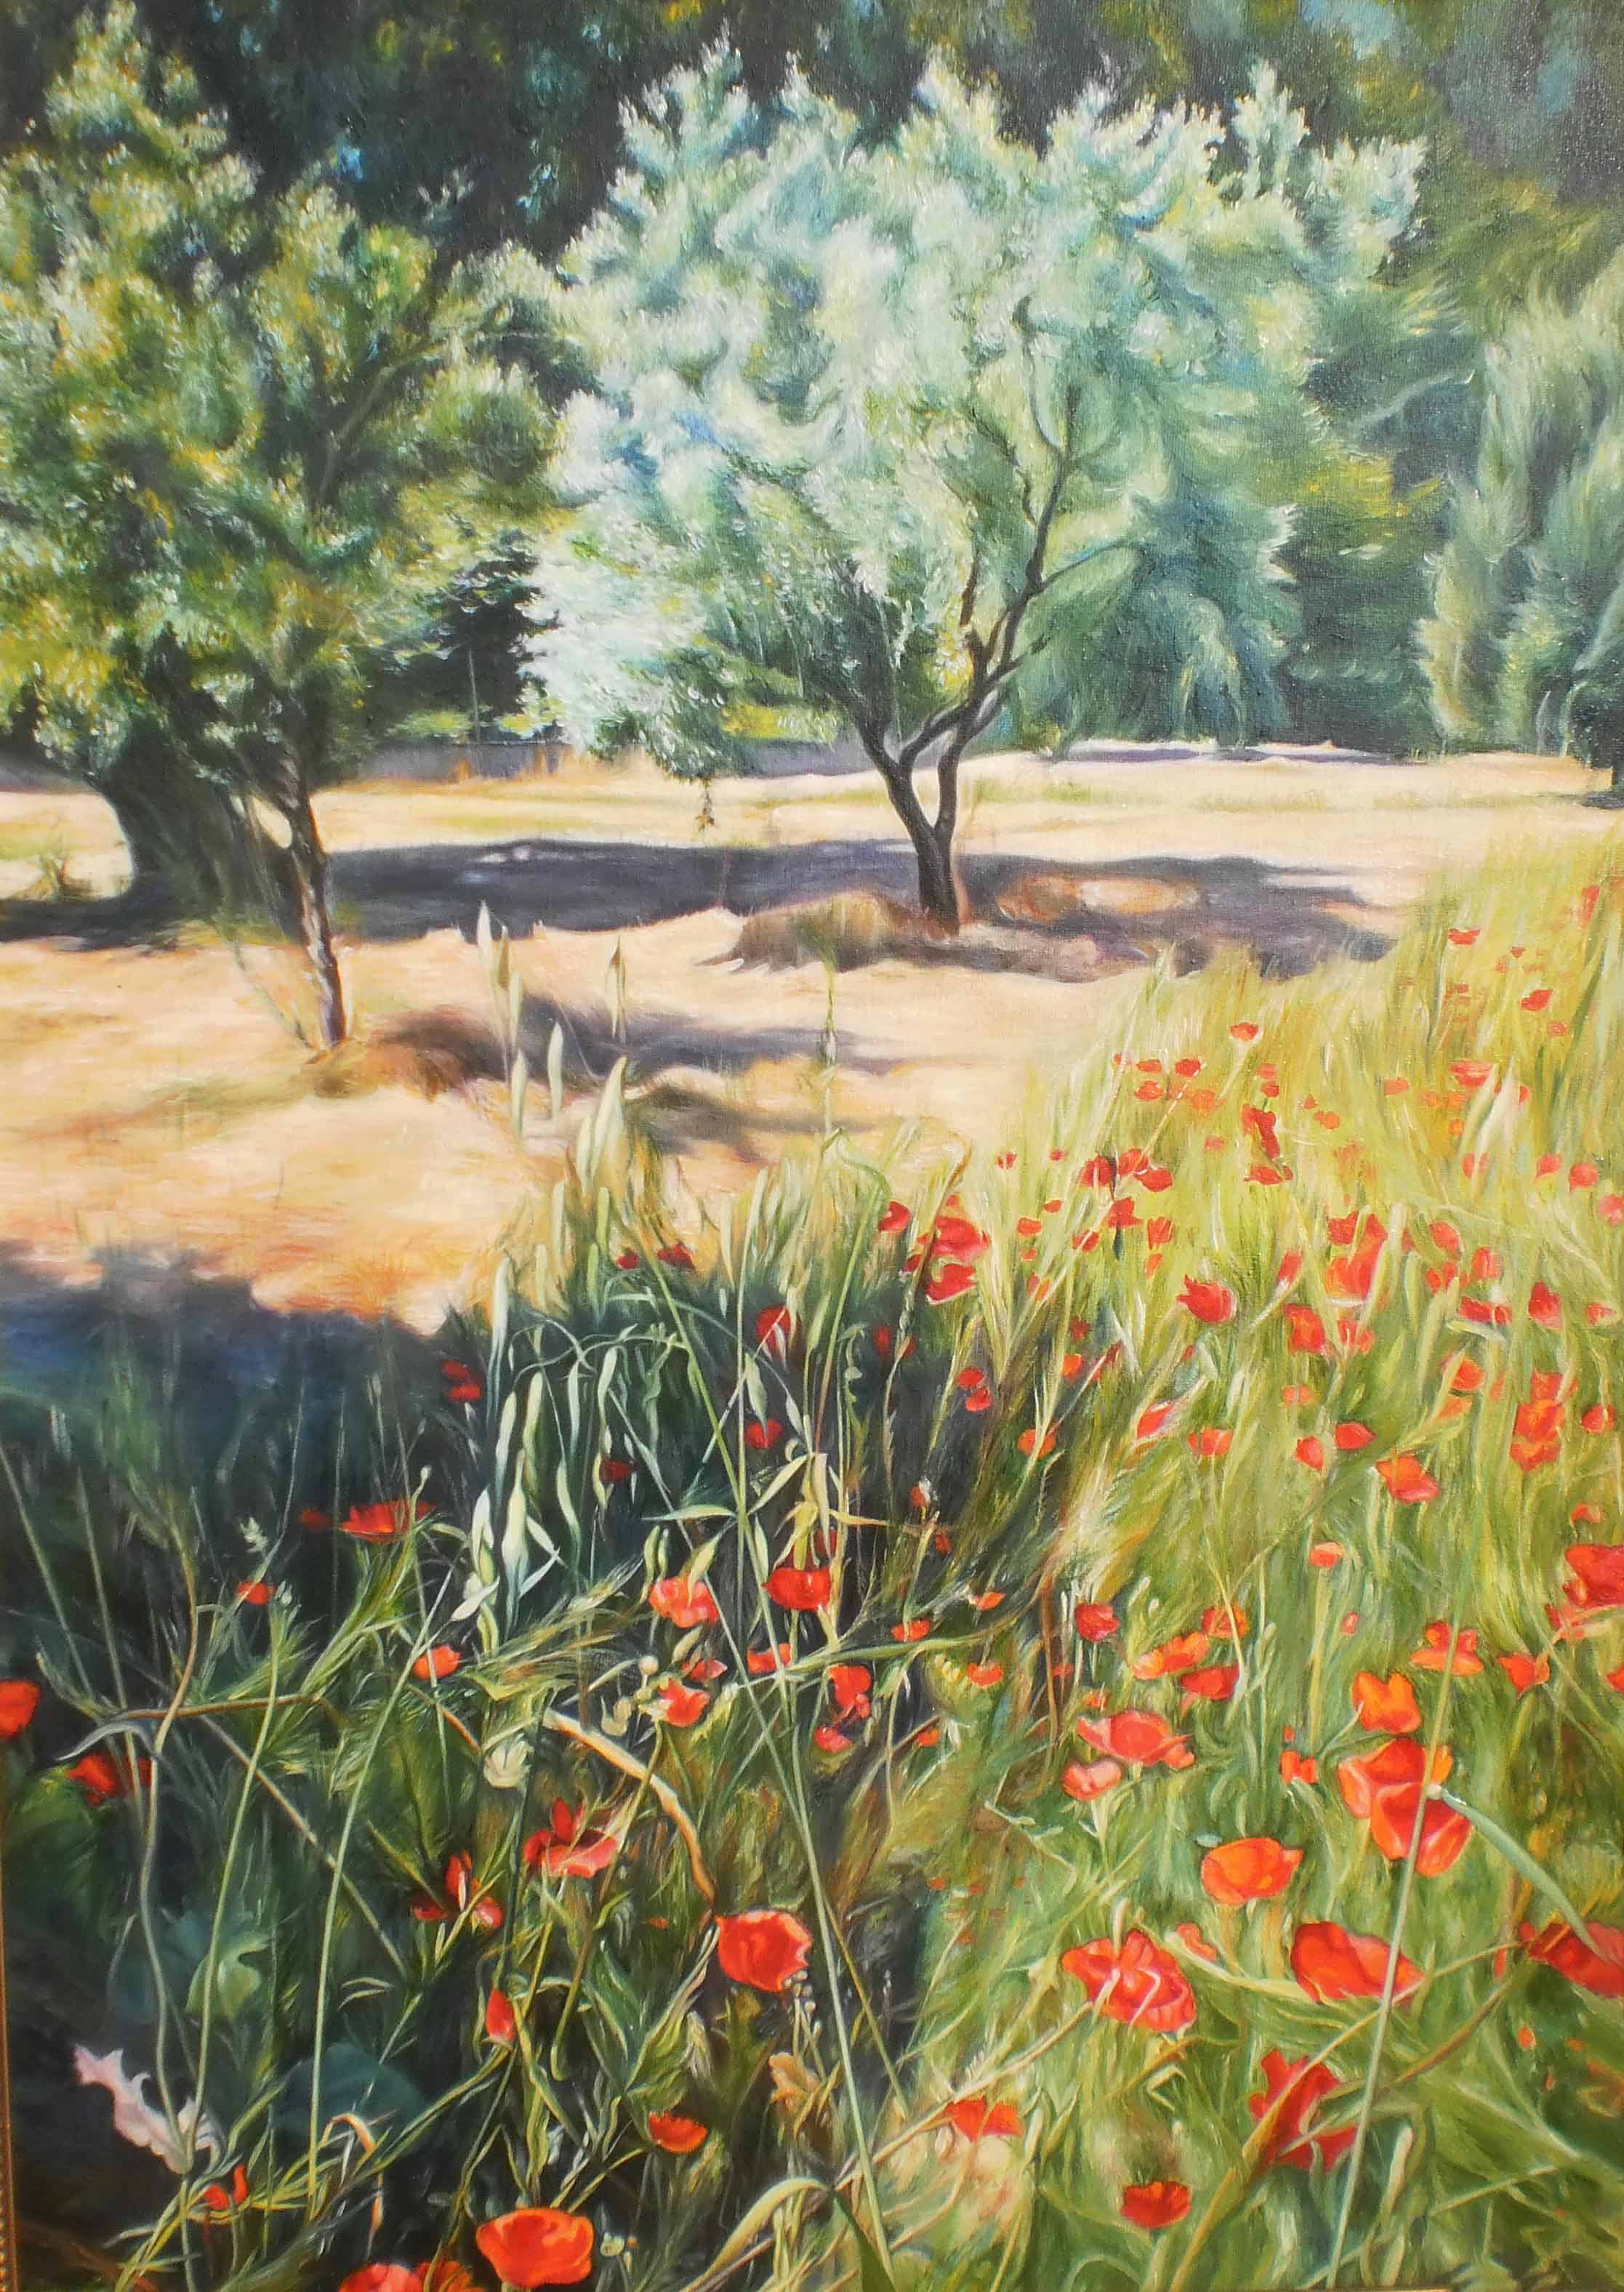 -Poppy flowers and olive trees- Dimensions: 50cm x 70cm